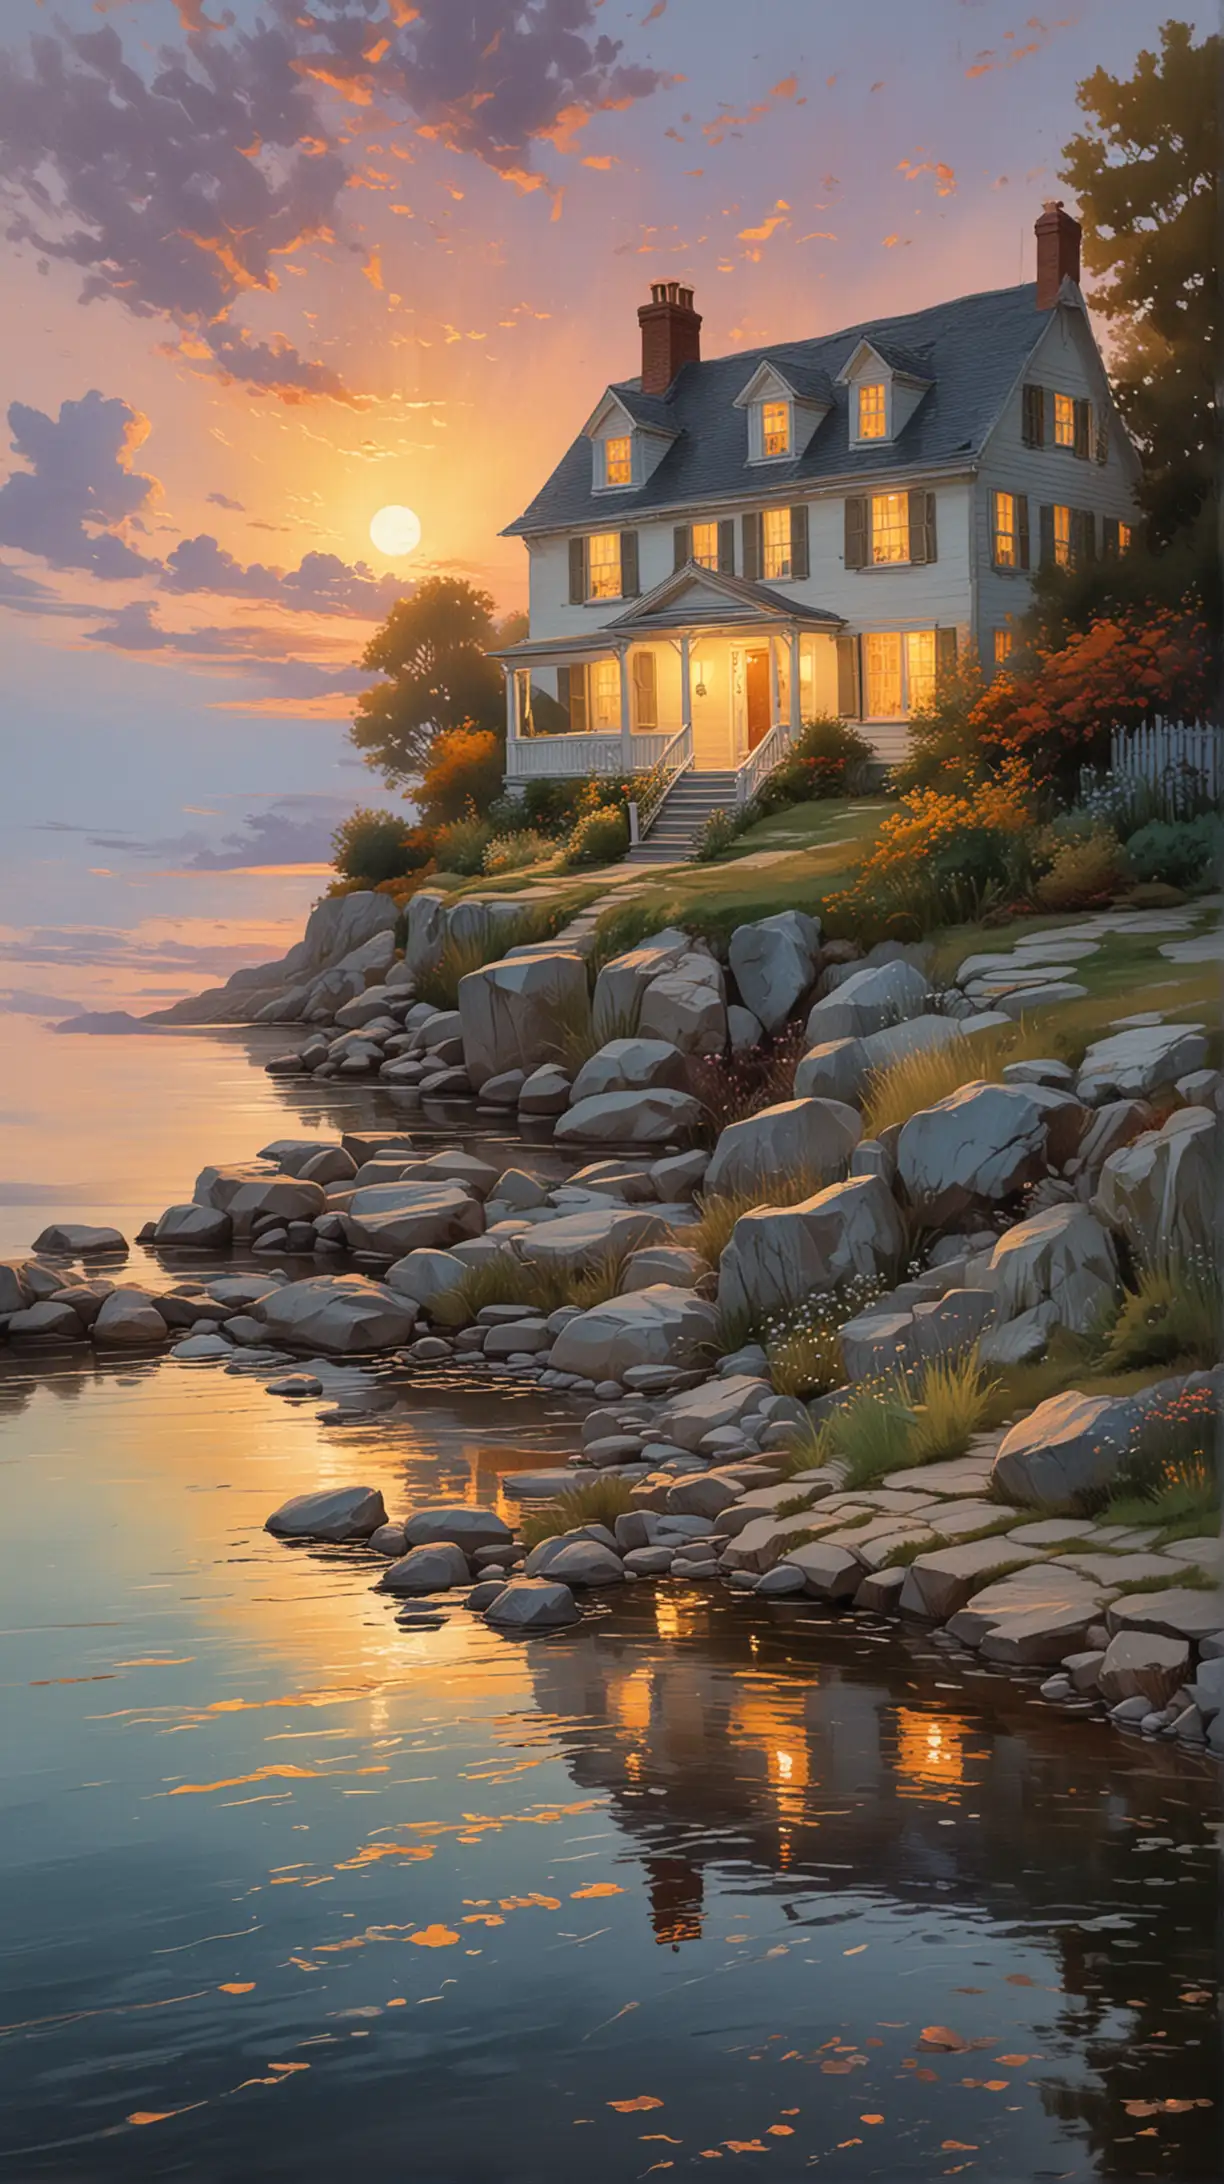 A picturesque scene of a quaint, white house situated on the edge of a serene body of water, depicted in an impressionistic painting style. The house has a traditional, cottage-like appearance with a pitched roof, two chimneys, and warm yellow light glowing from its windows, suggesting a cozy interior. The entrance is slightly ajar, with light spilling out onto the ground.

The setting is dusk, with a soft, golden sunset casting a warm glow across the sky and reflecting off the water. The sky is painted with a blend of soft blues, purples, and oranges, with wispy clouds scattered throughout, adding depth and texture to the scene. The water is calm, mirroring the house and the warm light emanating from it, creating a tranquil and reflective ambiance.

A cobblestone path leads to the house, winding its way through the foreground and partially submerged in the water. The stones are uneven and artistically rendered, with highlights and shadows giving them a three-dimensional quality. The surrounding landscape includes rocky outcrops and sparse vegetation, painted with broad, textured brushstrokes that convey the ruggedness of the terrain.

The overall color palette consists of cool blues and greys, contrasting beautifully with the warm yellows and oranges of the sunset and the house’s lights. The painting exudes a sense of solitude and peace, capturing the quiet beauty of the moment as day transitions into night. The brushwork is expressive and loose, typical of impressionistic techniques, adding a dreamy and atmospheric quality to the artwork.